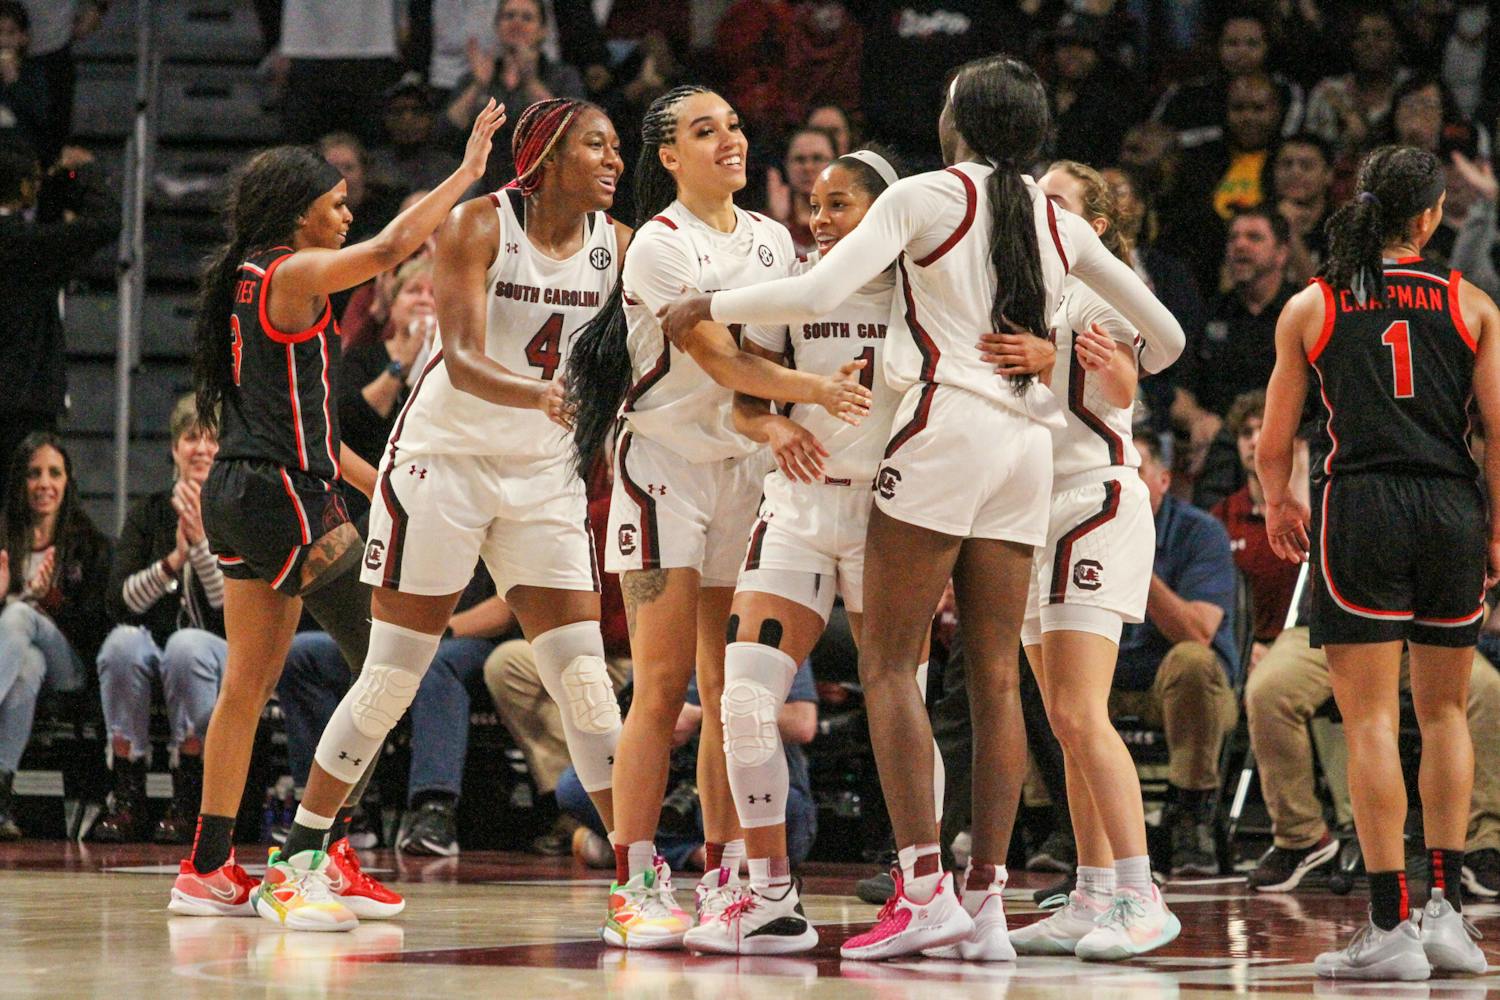 South Carolina women's basketball team claimed the SEC regular season championship following its 73-63 victory over the Georgia Bulldogs at Colonial Life Arena on Feb. 26, 2023. The Gamecocks remain undefeated heading into the SEC tournament next week in Greenville, South Carolina.